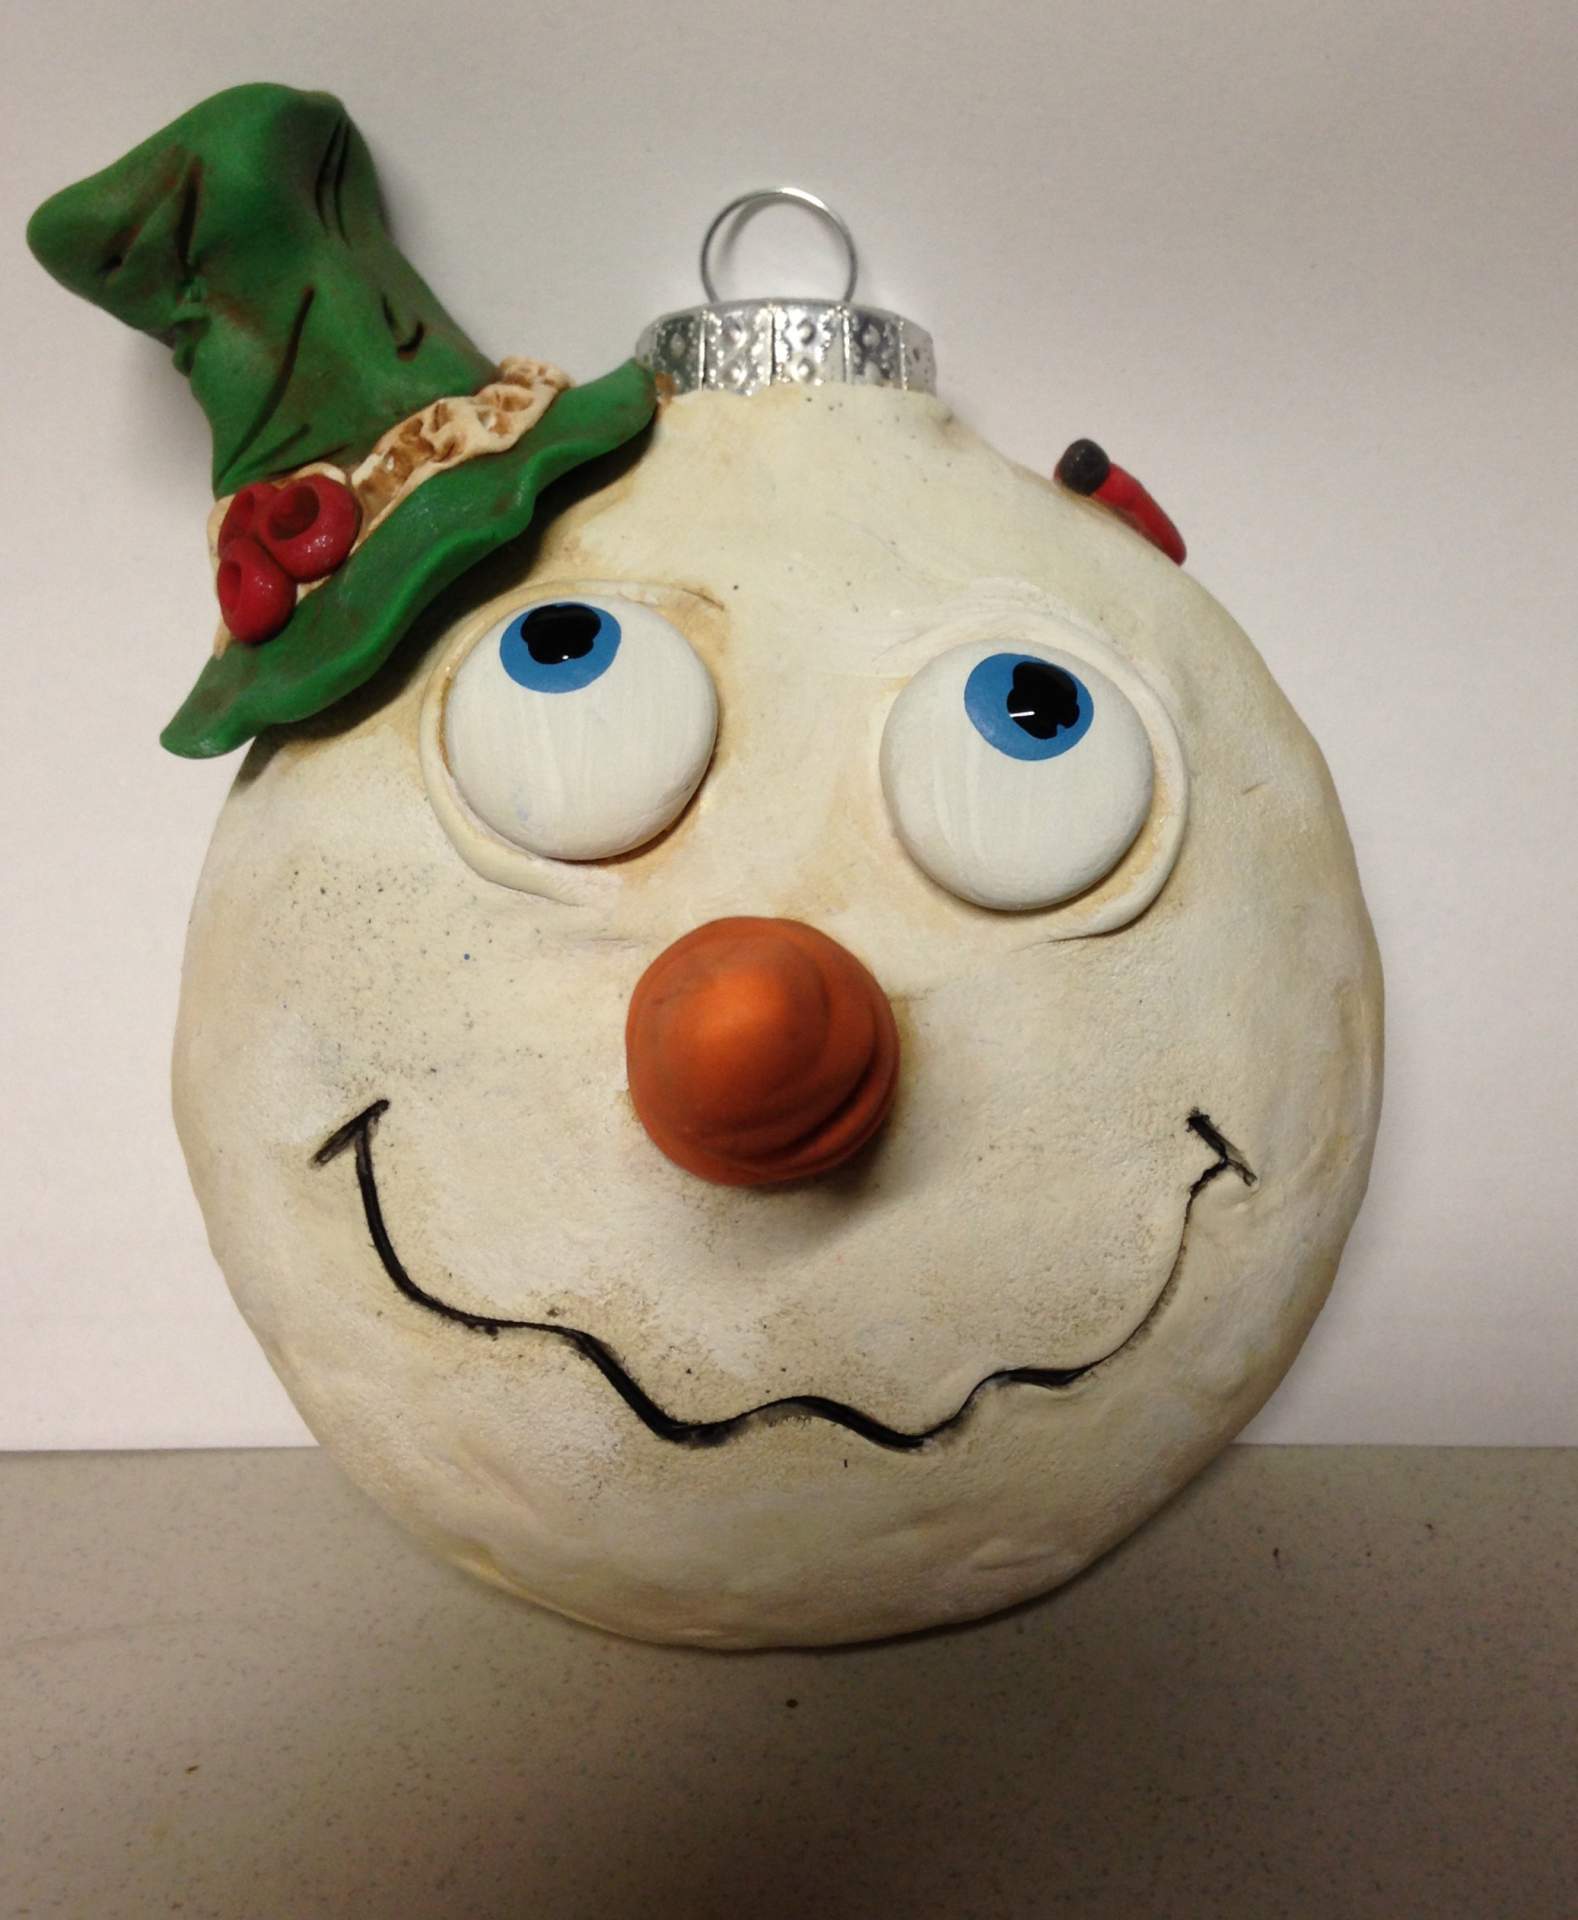 Polymer Clay Snowman Ornament Class with artist Rosanna Cappellino